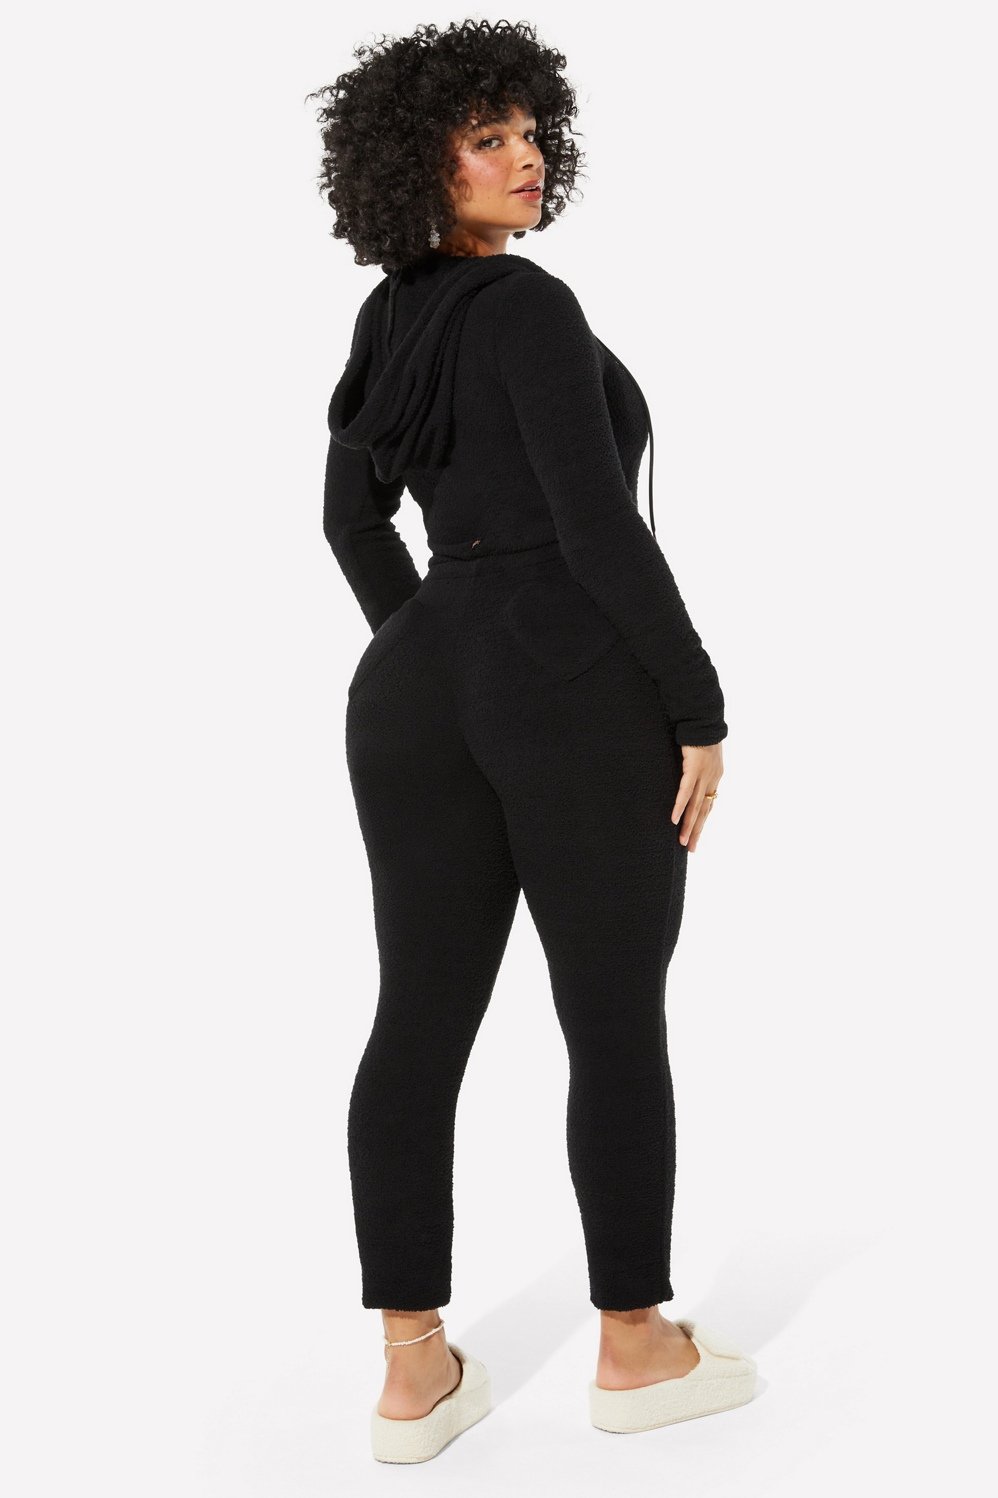 https://cdn.fabletics.com/media/images/products/ON2253621-0687/ON2253621-0687-3_998x1498.jpg?t=1698519403807